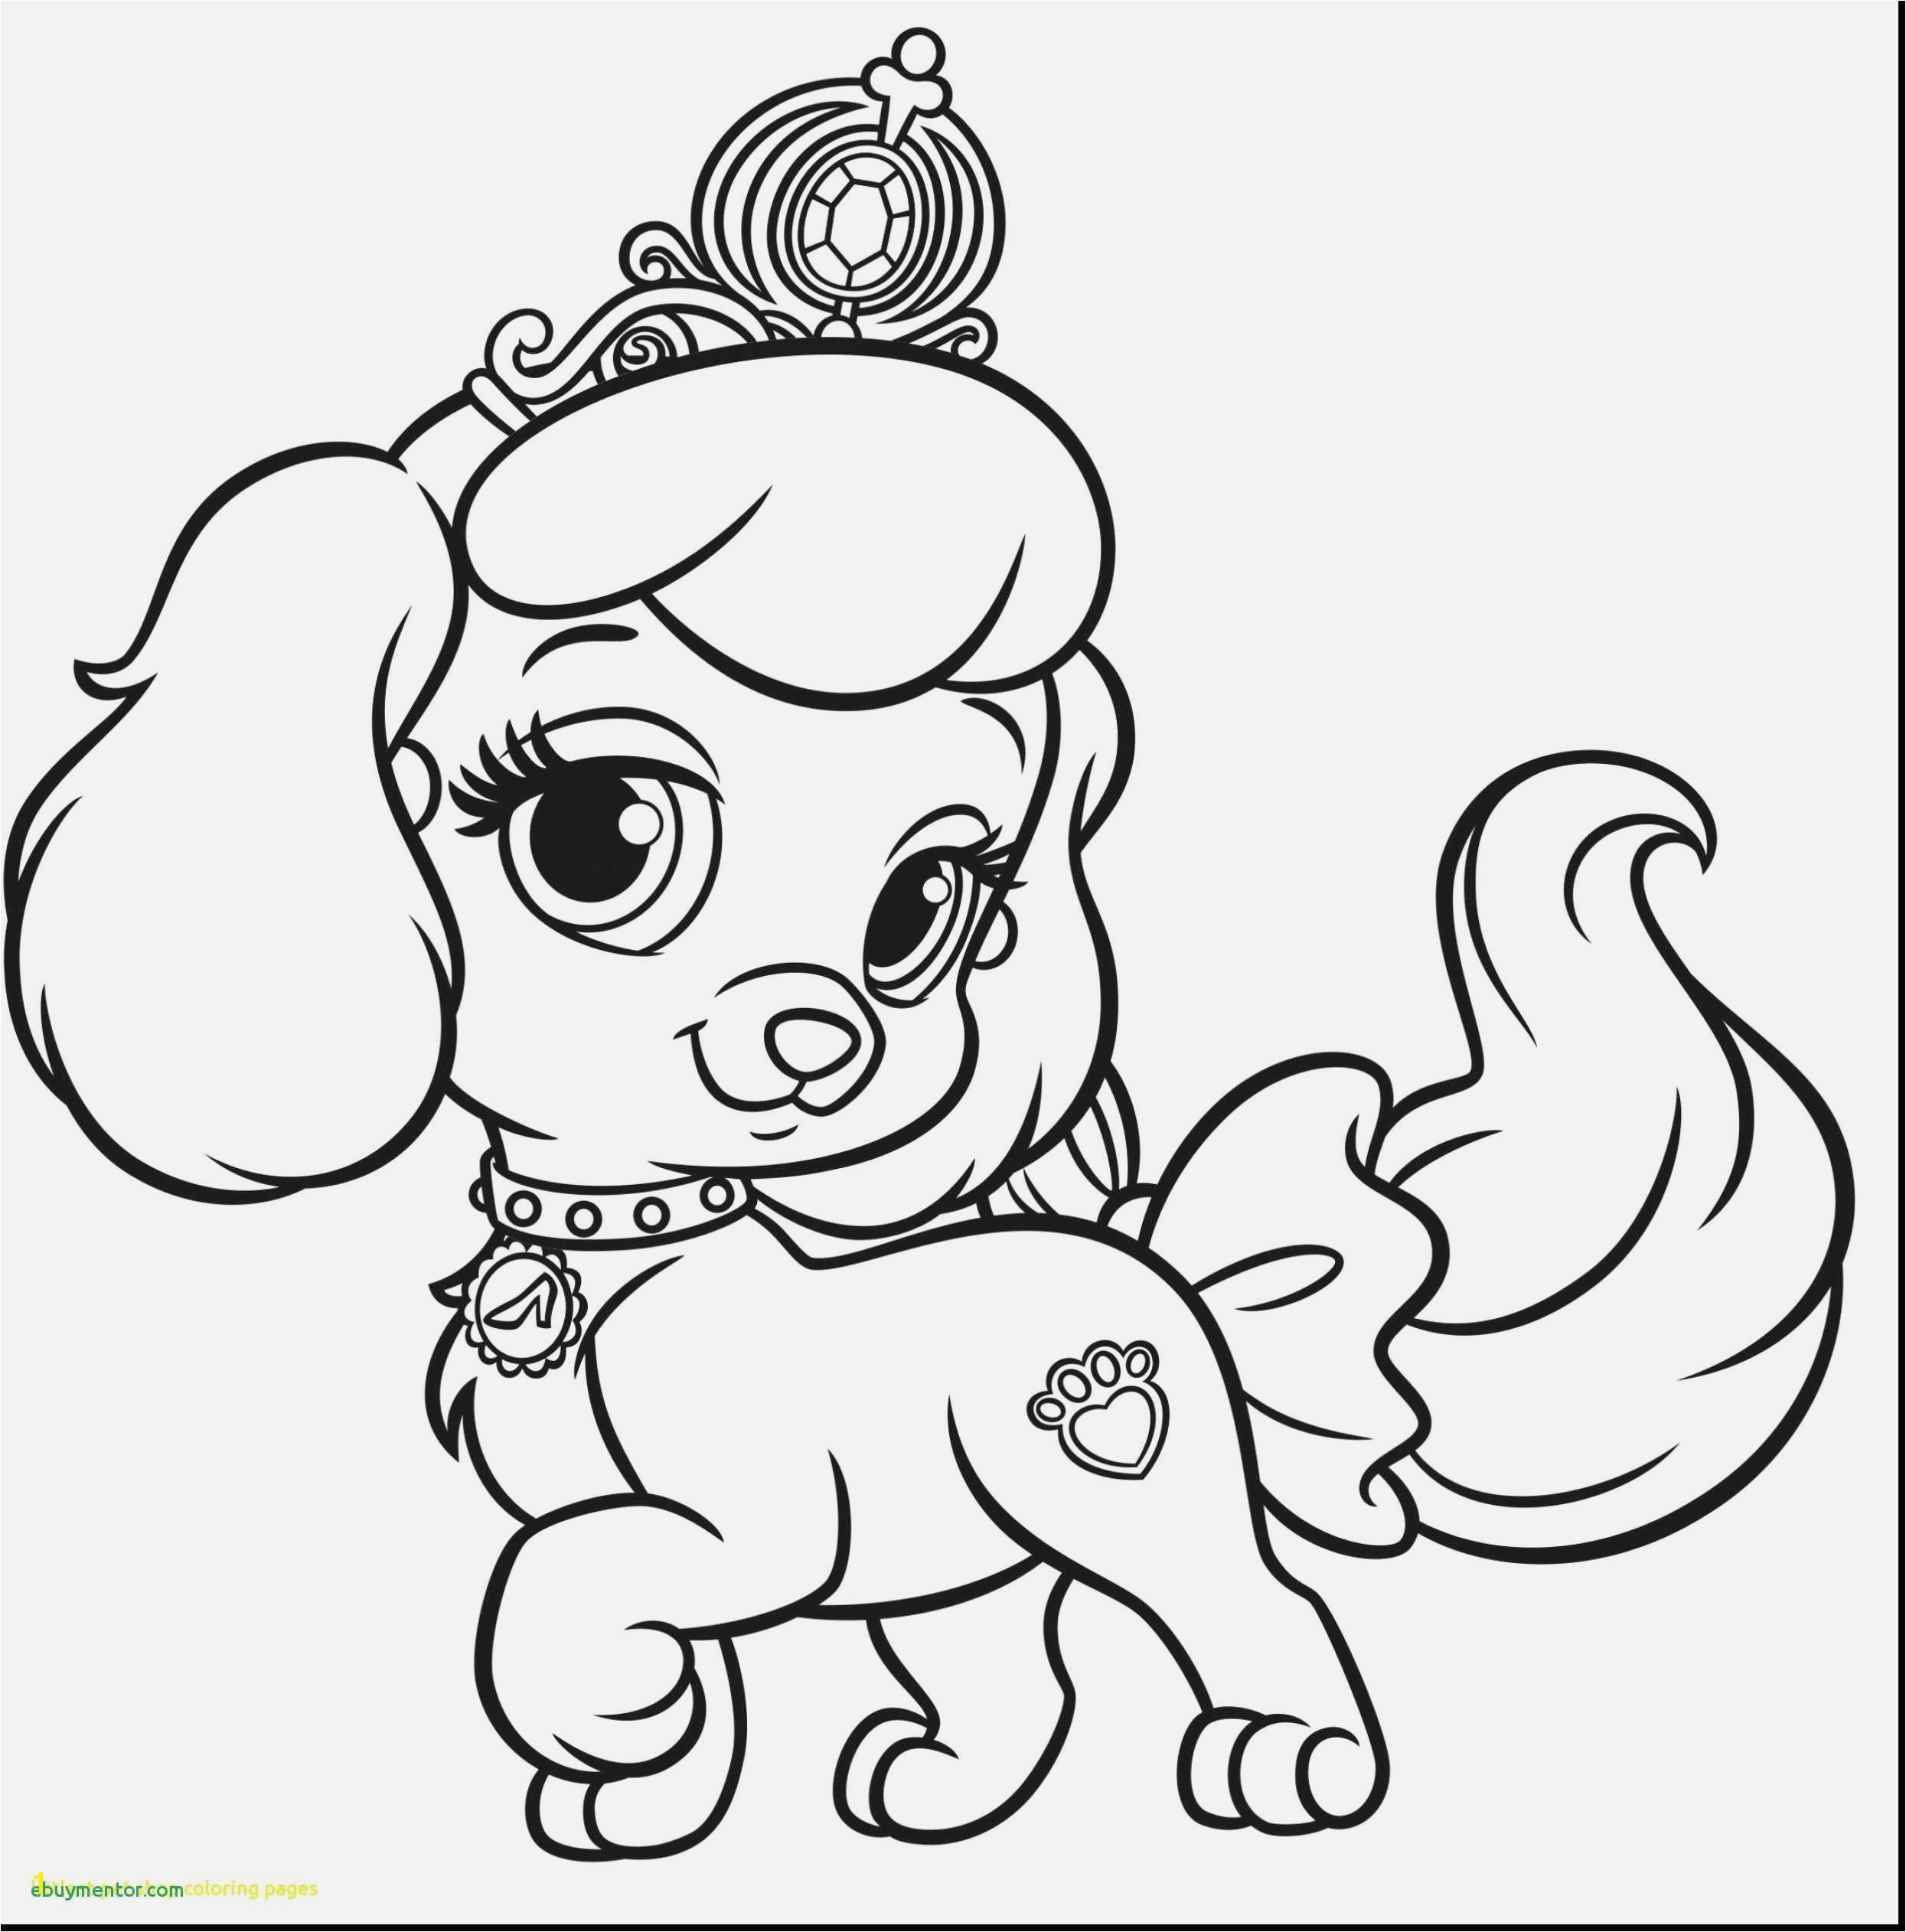 Pretty Coloring Pages Download and Print for Free Beautiful Littlest Pet Shop Coloring Pages Coloring Pages